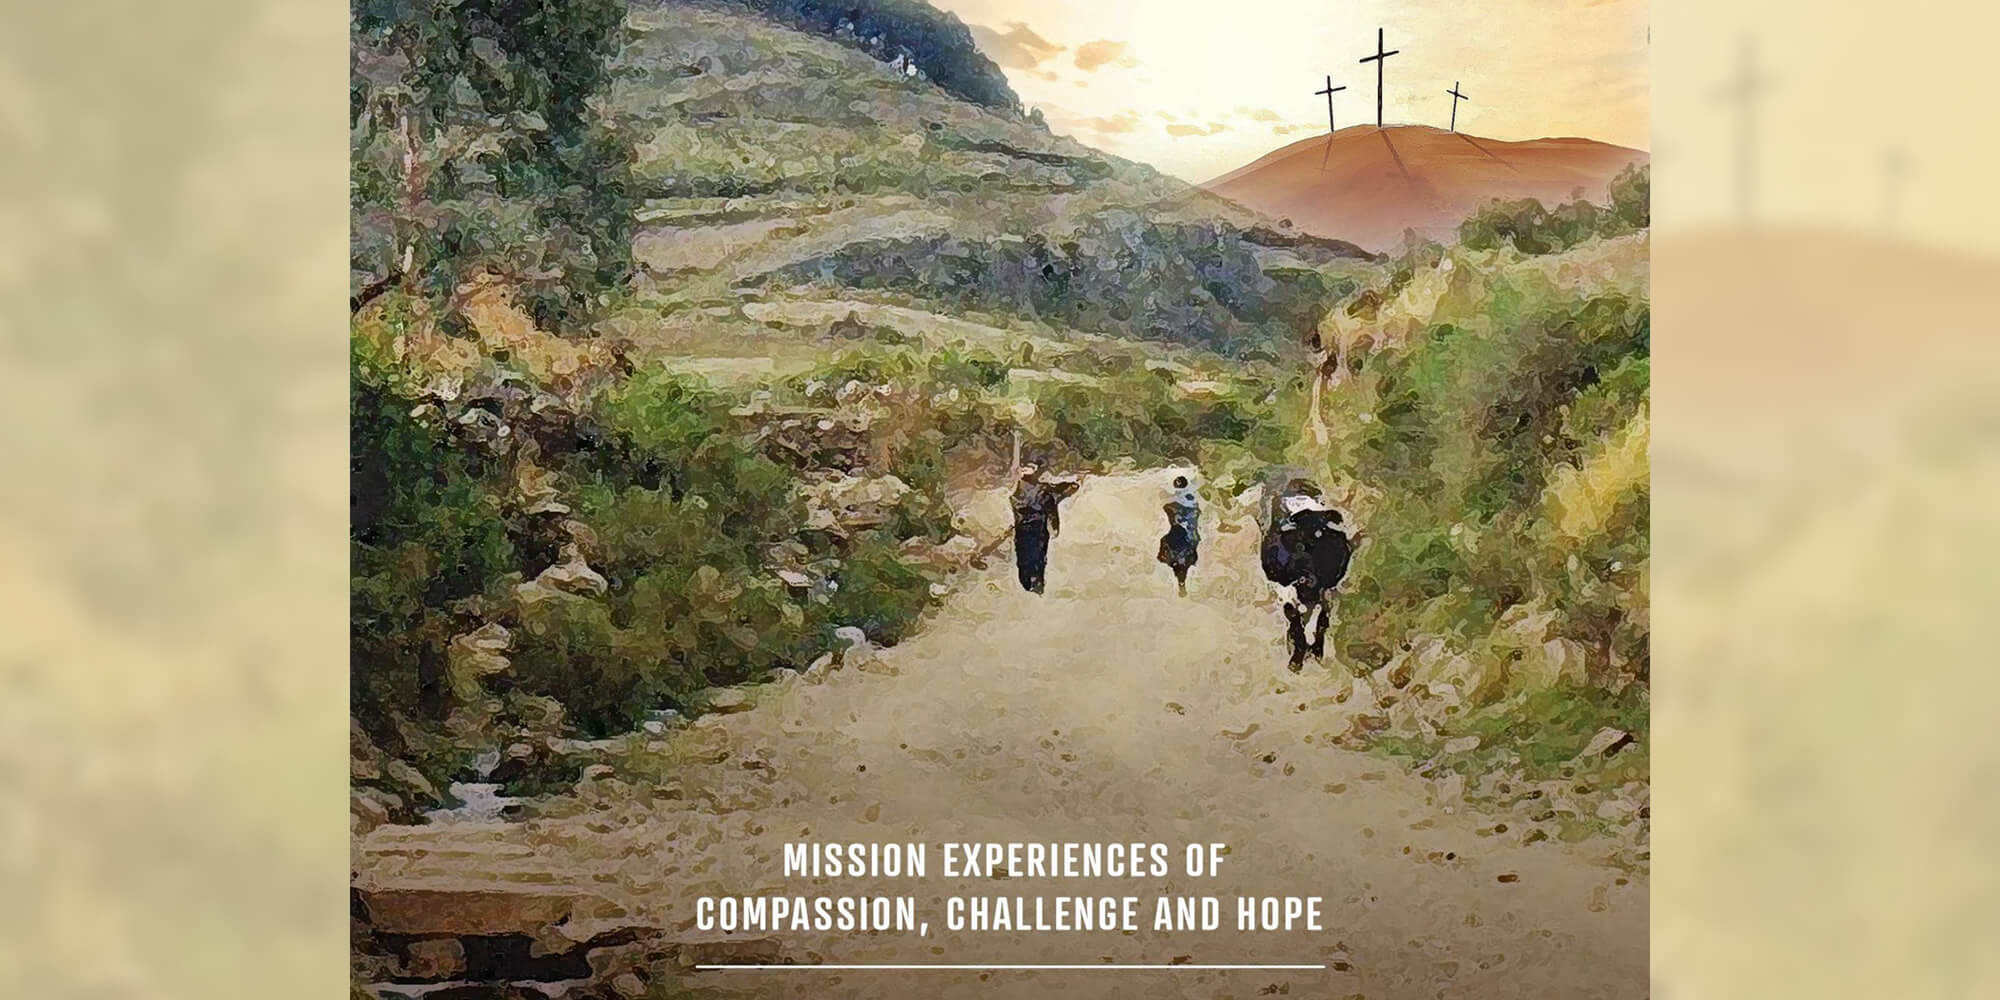 Resource: Lenten reflections on mission experiences